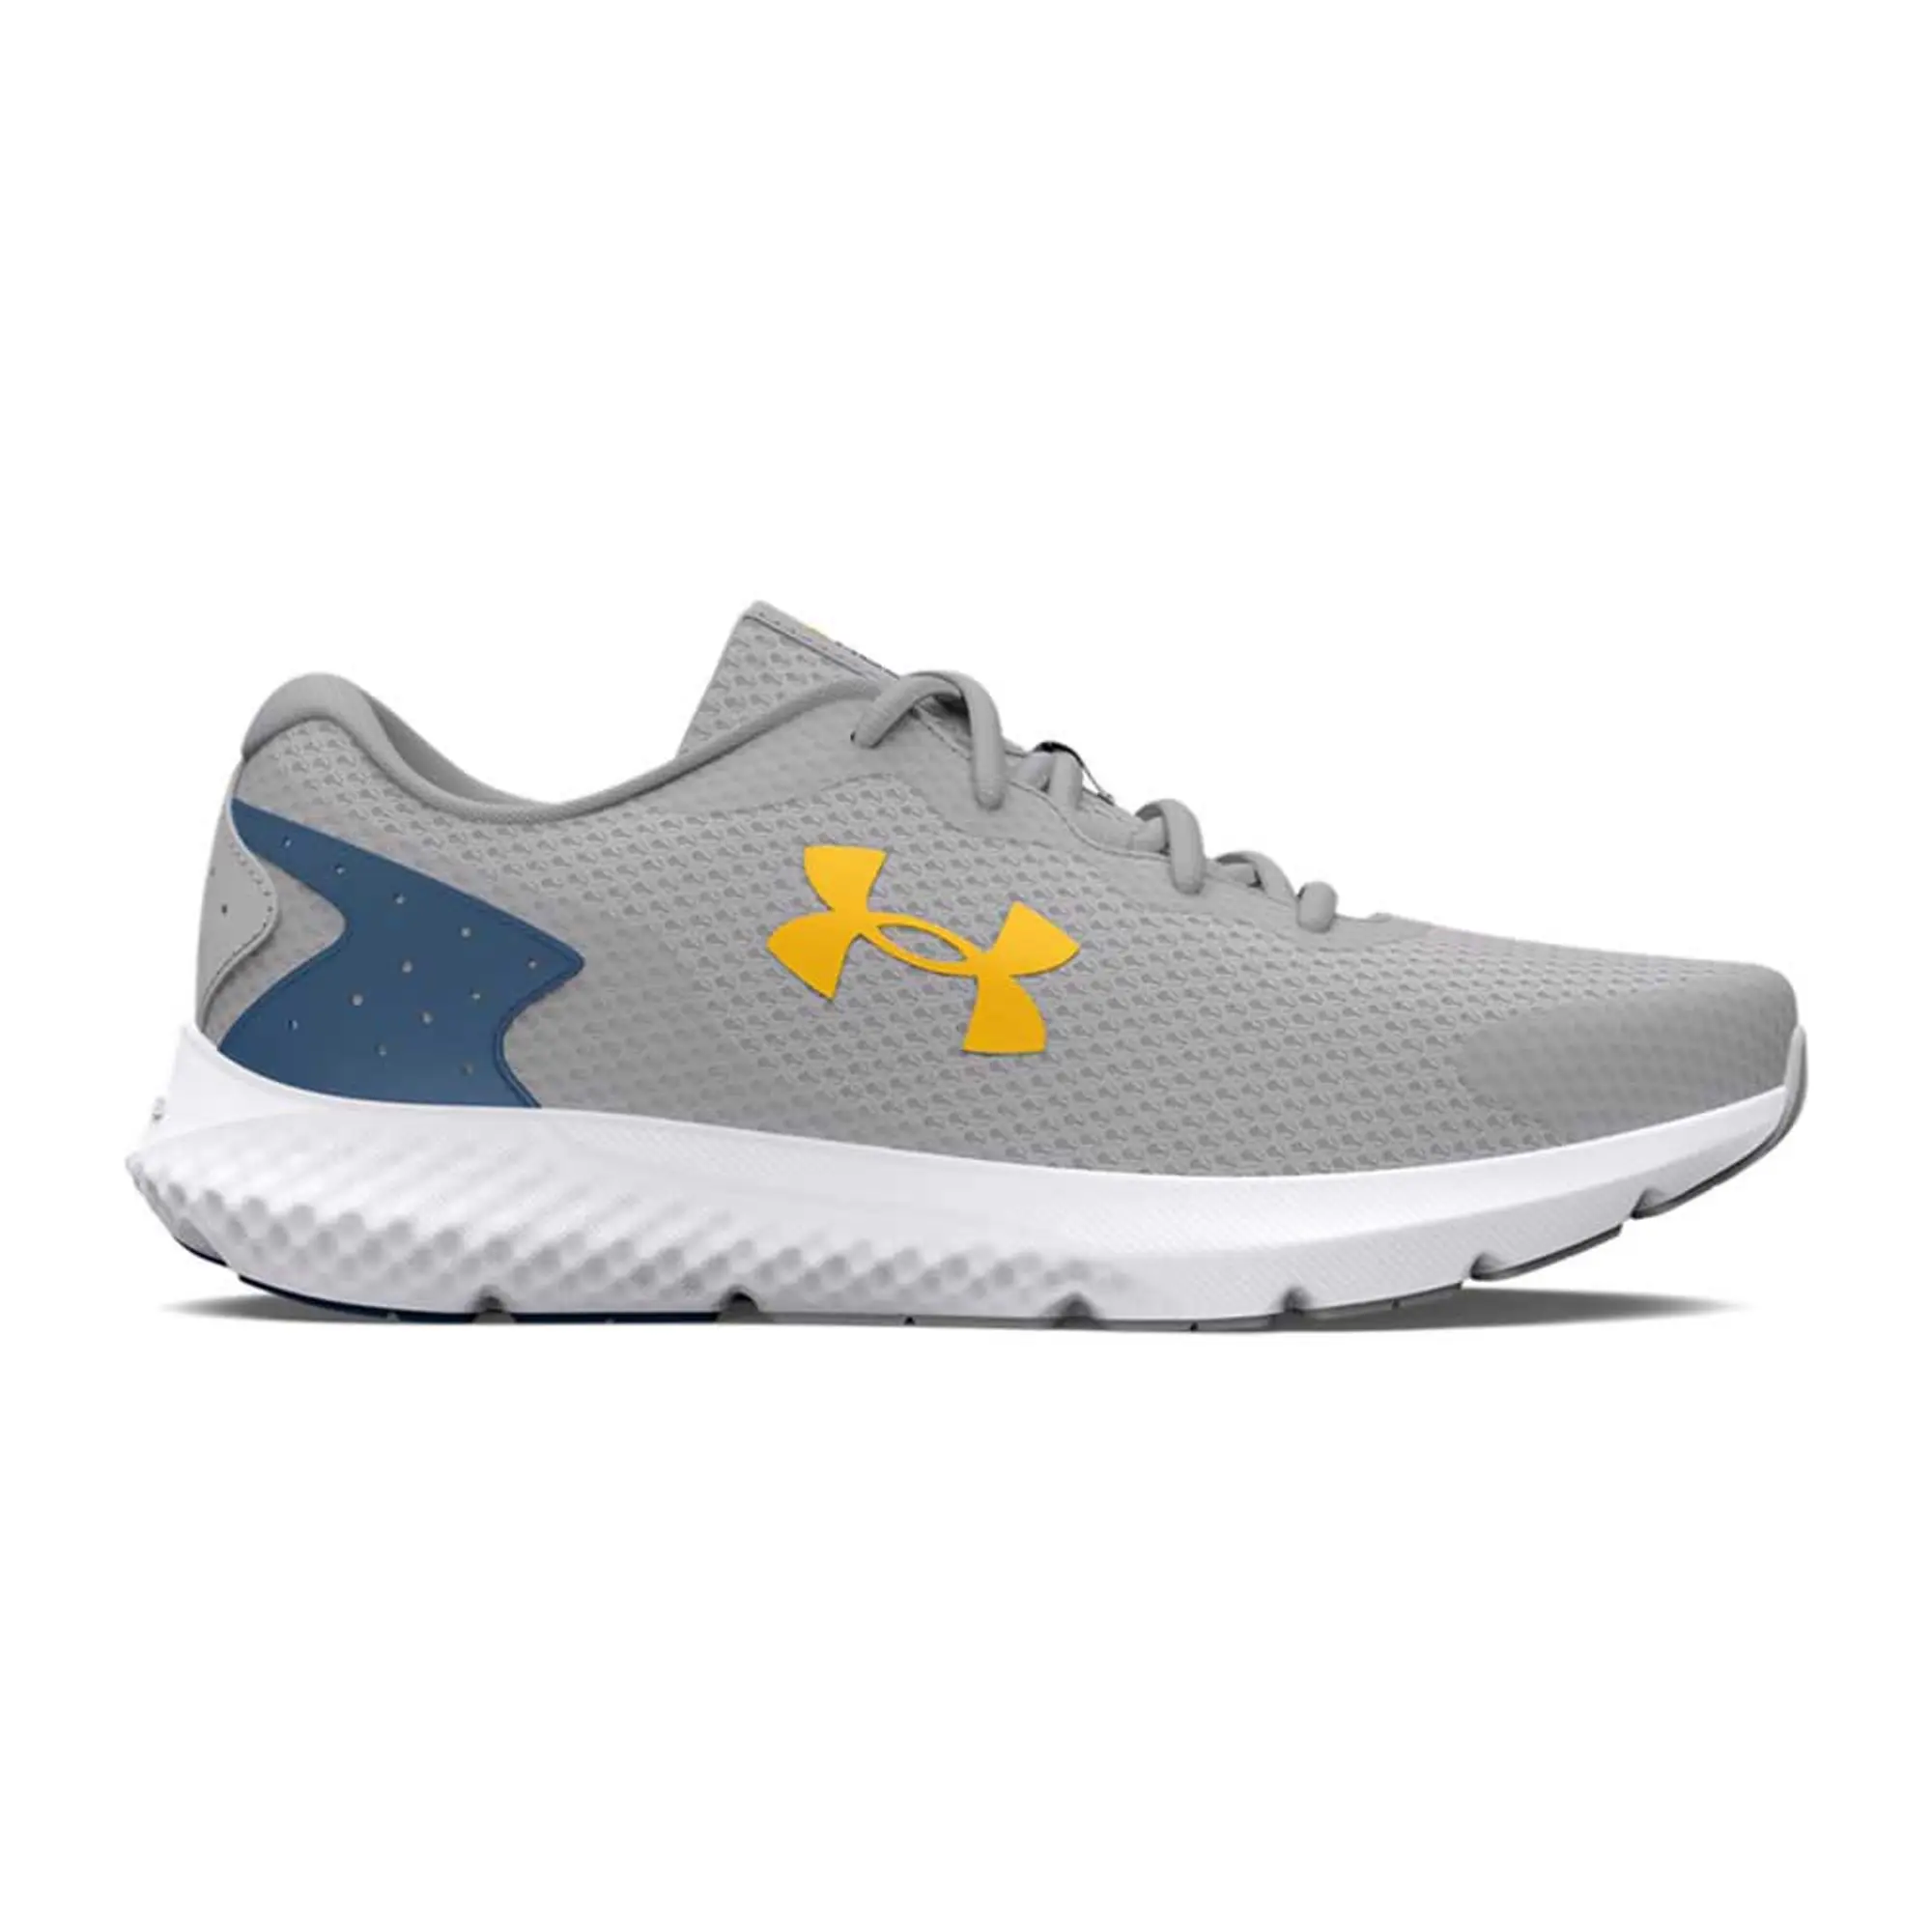 Under Armour Charged Rogue 3 Running Shoes  EU 47 1/2 Man -